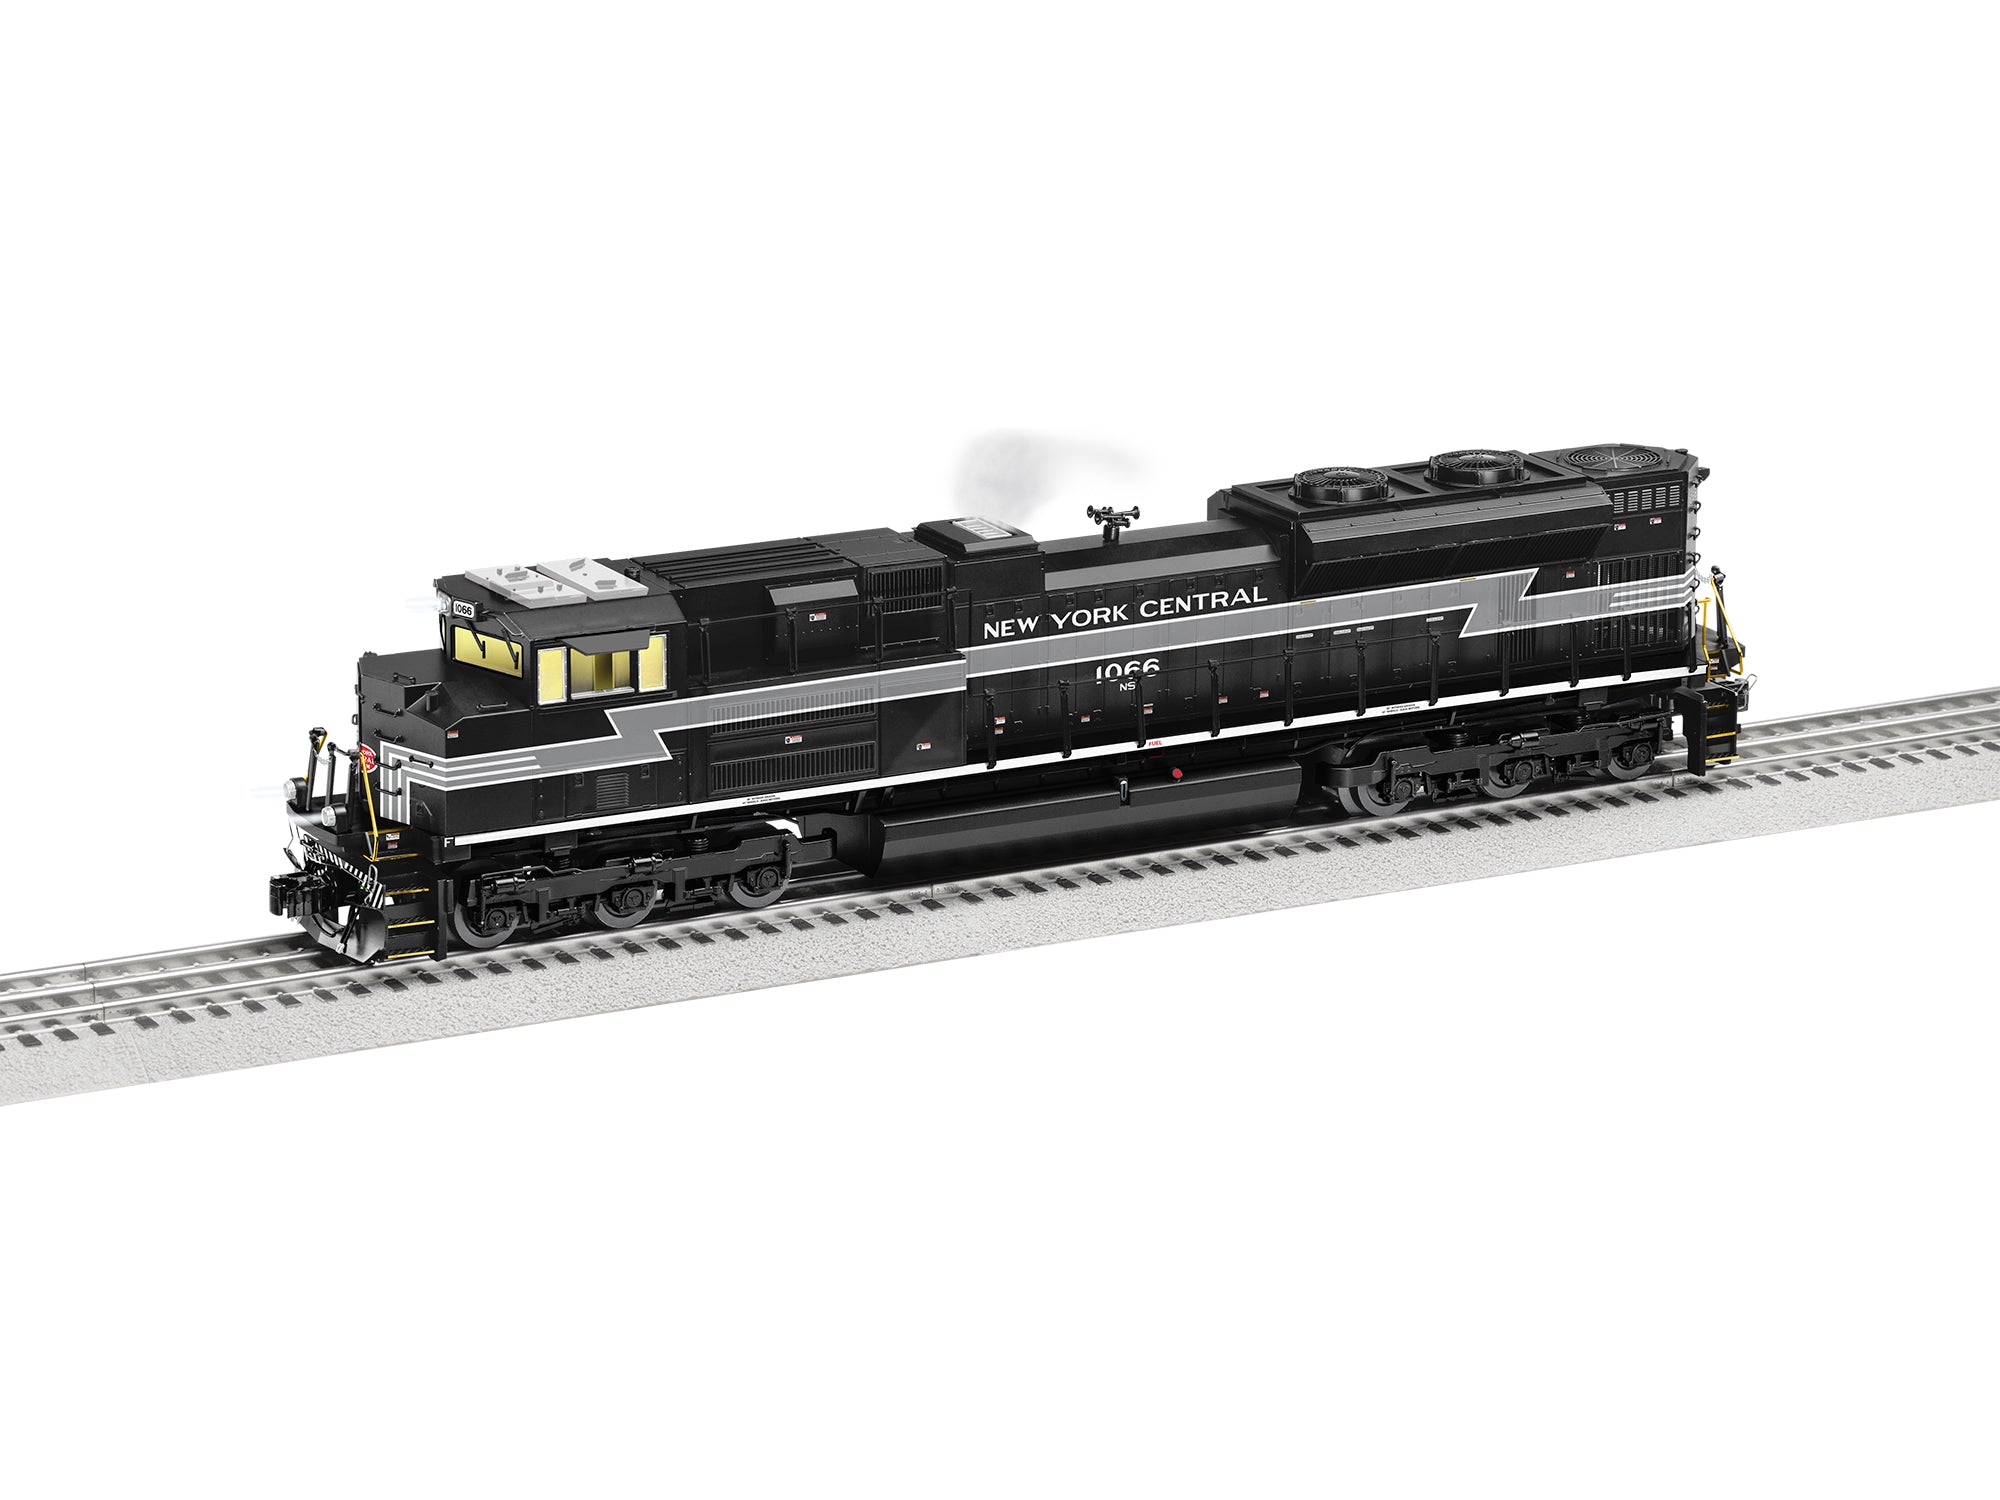 Lionel 2433089 - SD70ACE Diesel Engine "New York Central" #1066 (Non-PWD) Norfolk Southern